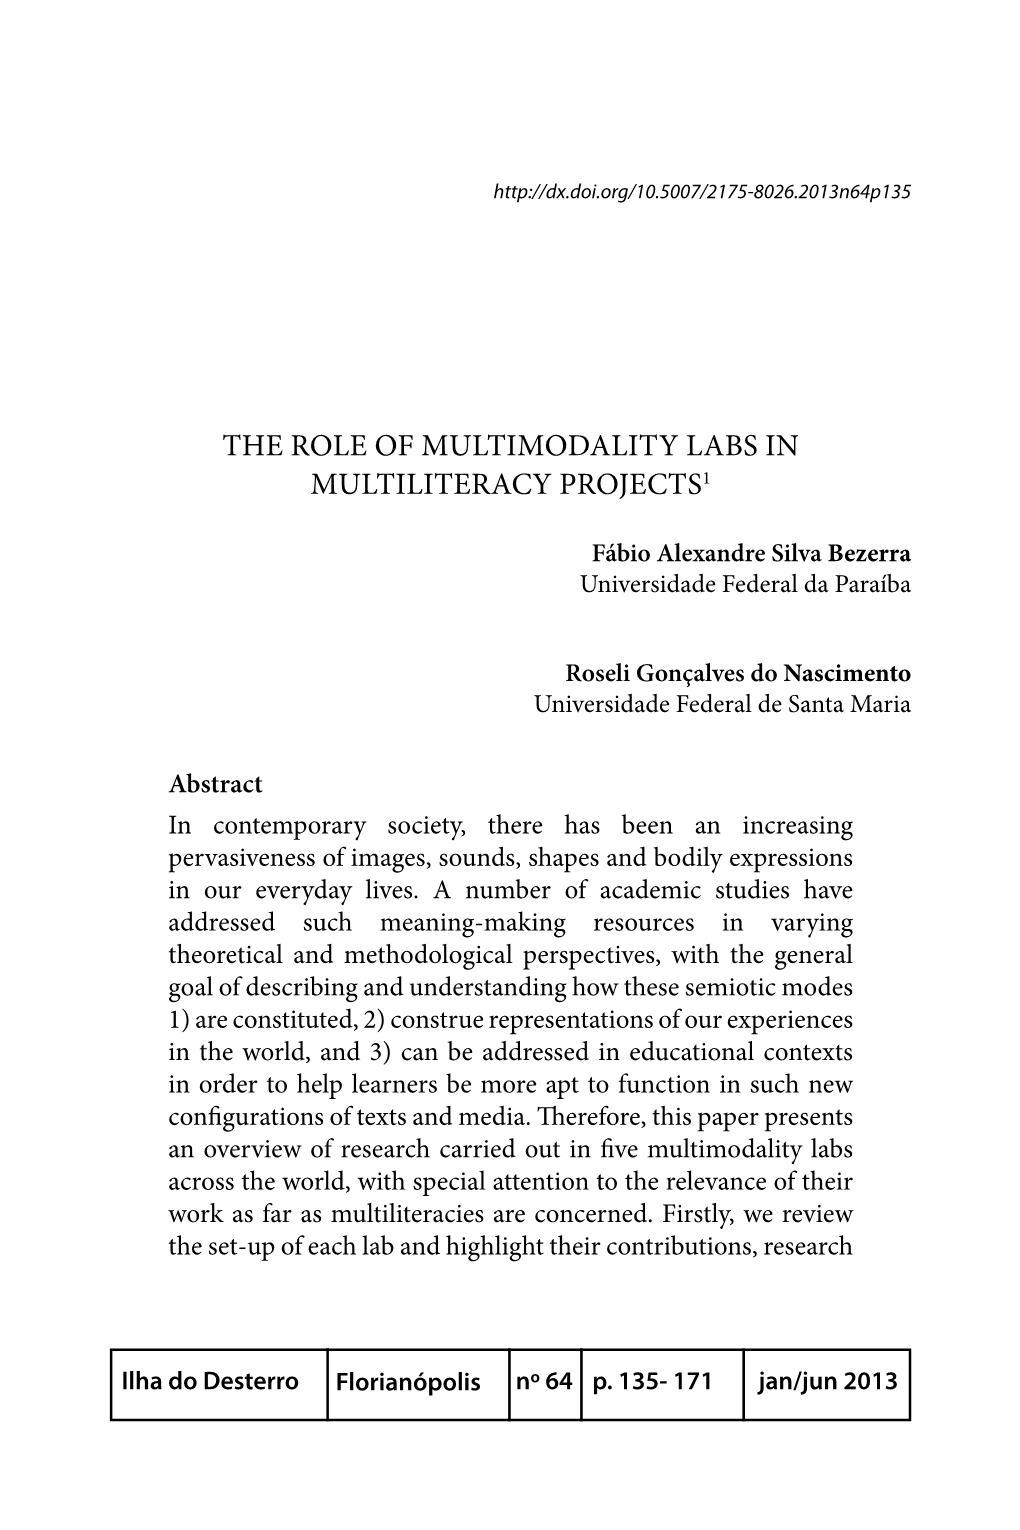 The Role of Multimodality Labs in Multiliteracy Projects1